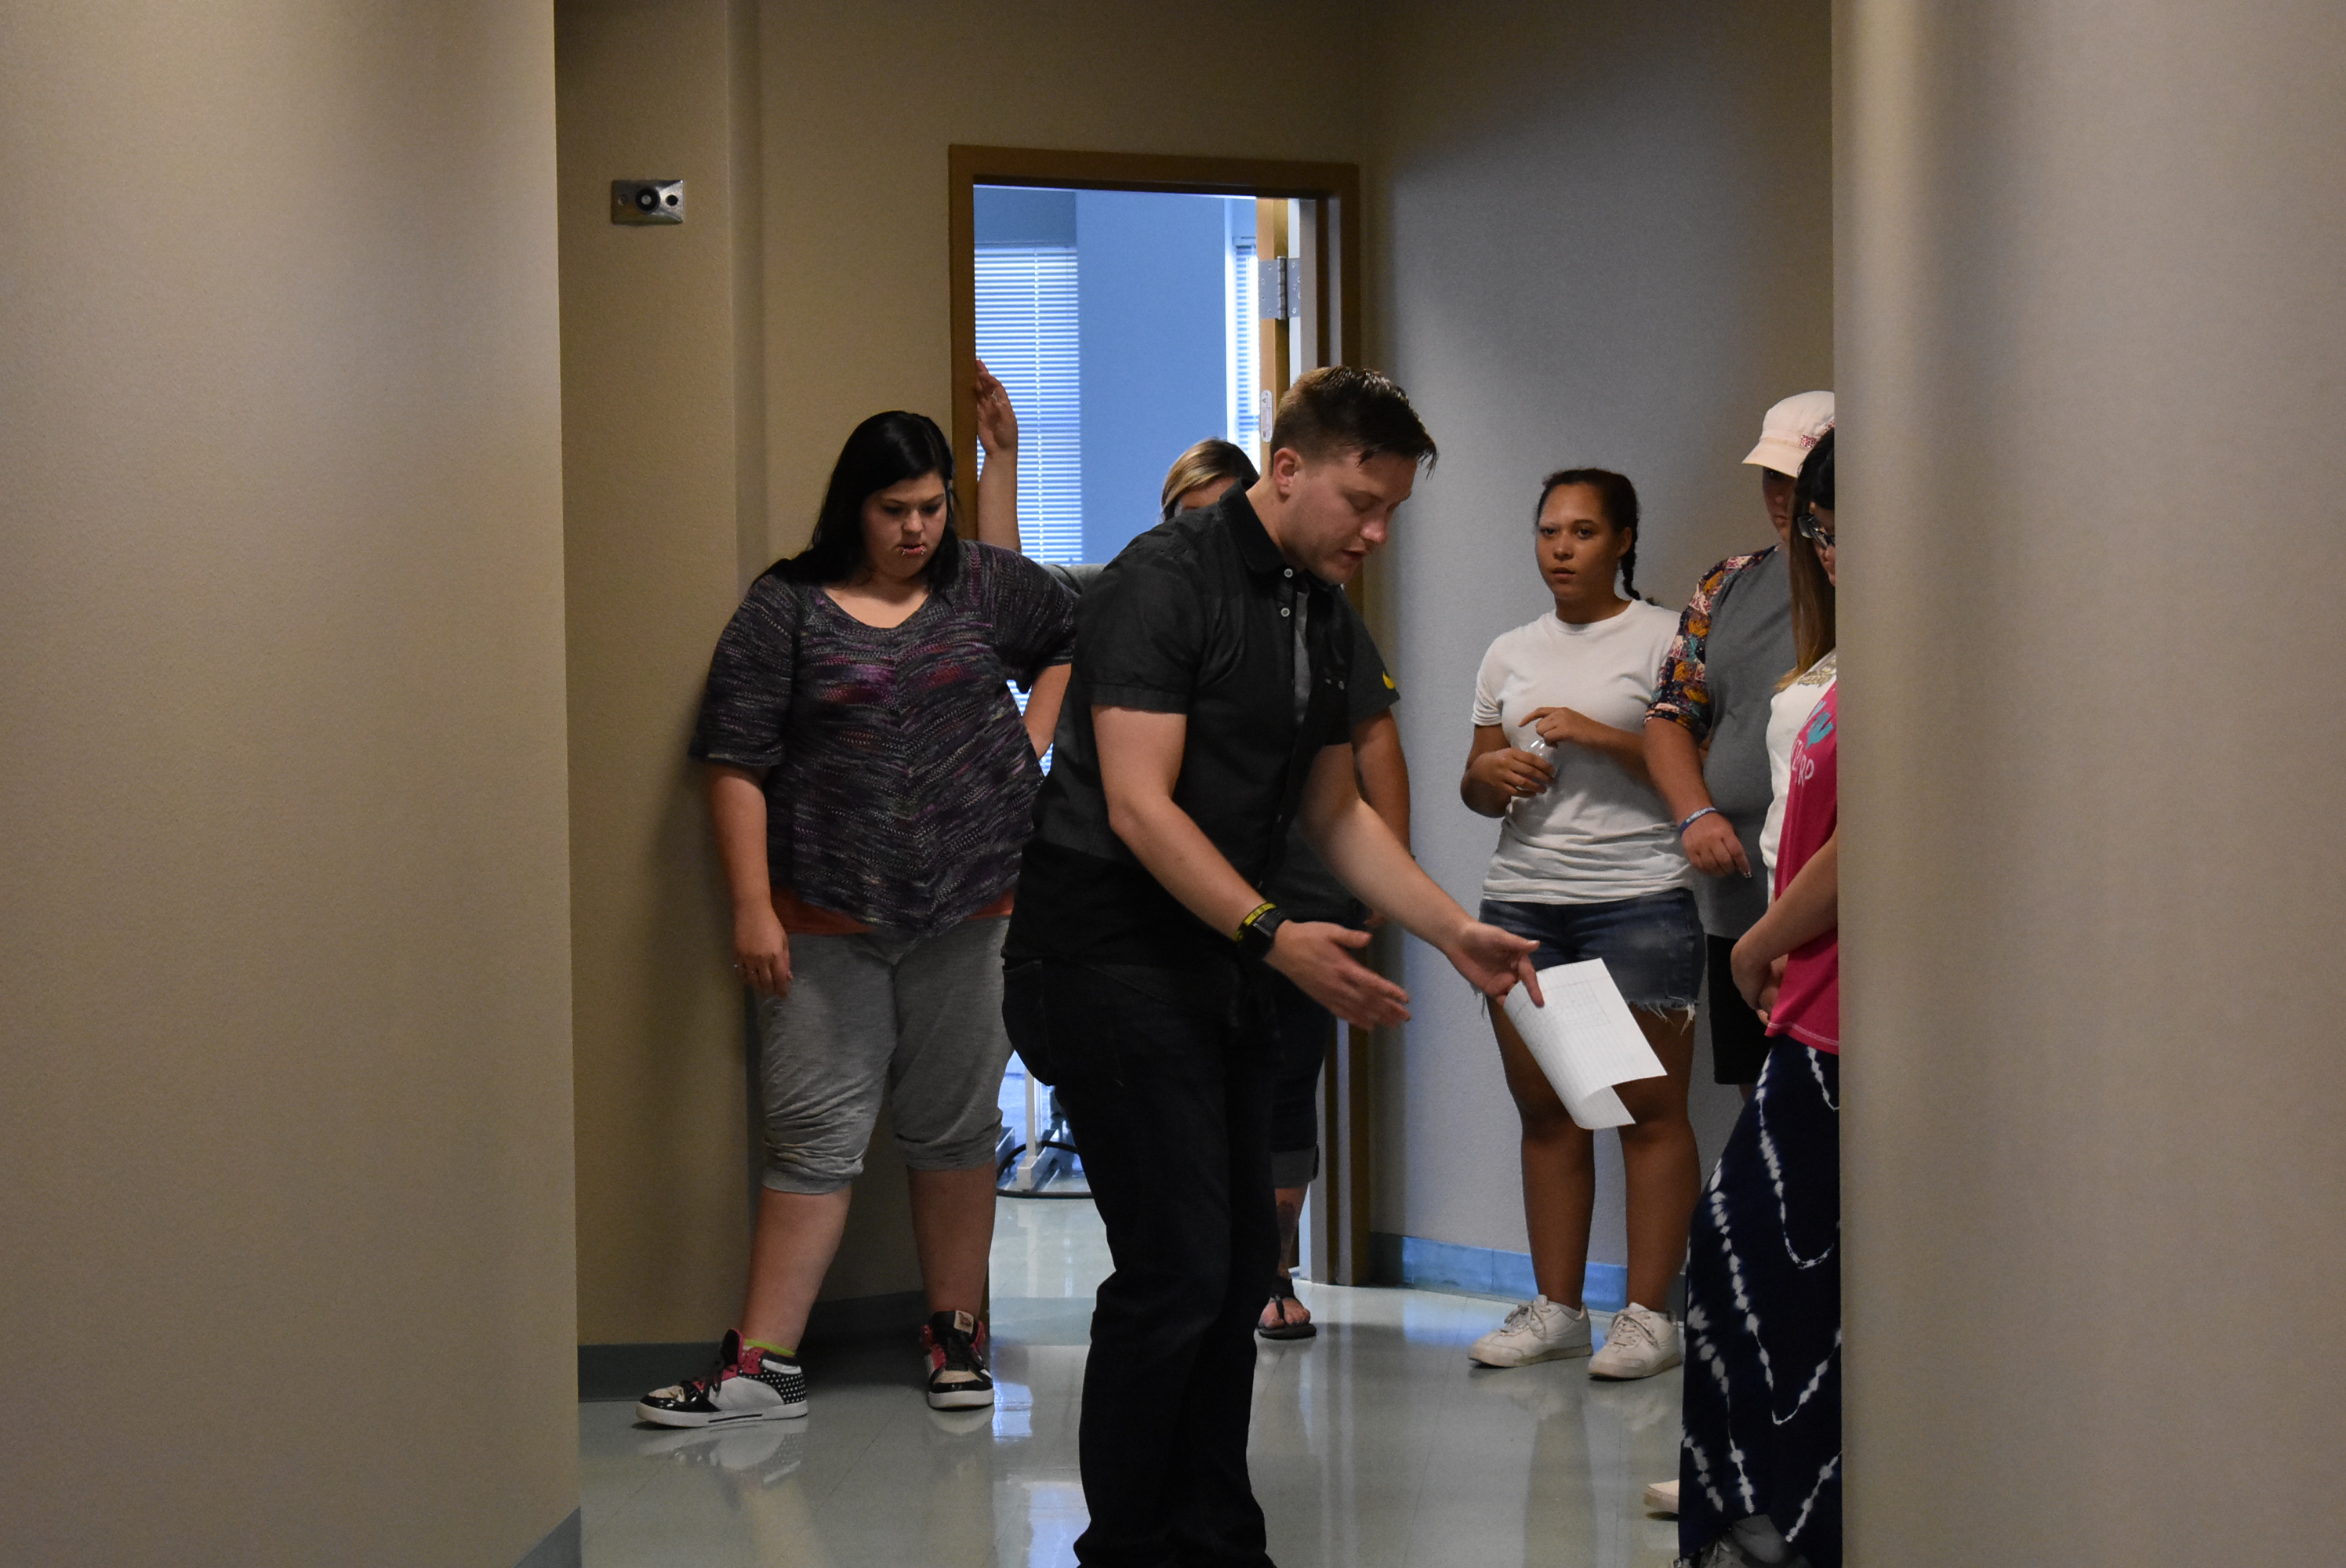 A man holding a piece of paper in one hand looks down towards a hallway floor. A group arranged in a semi-circle around the man look on.